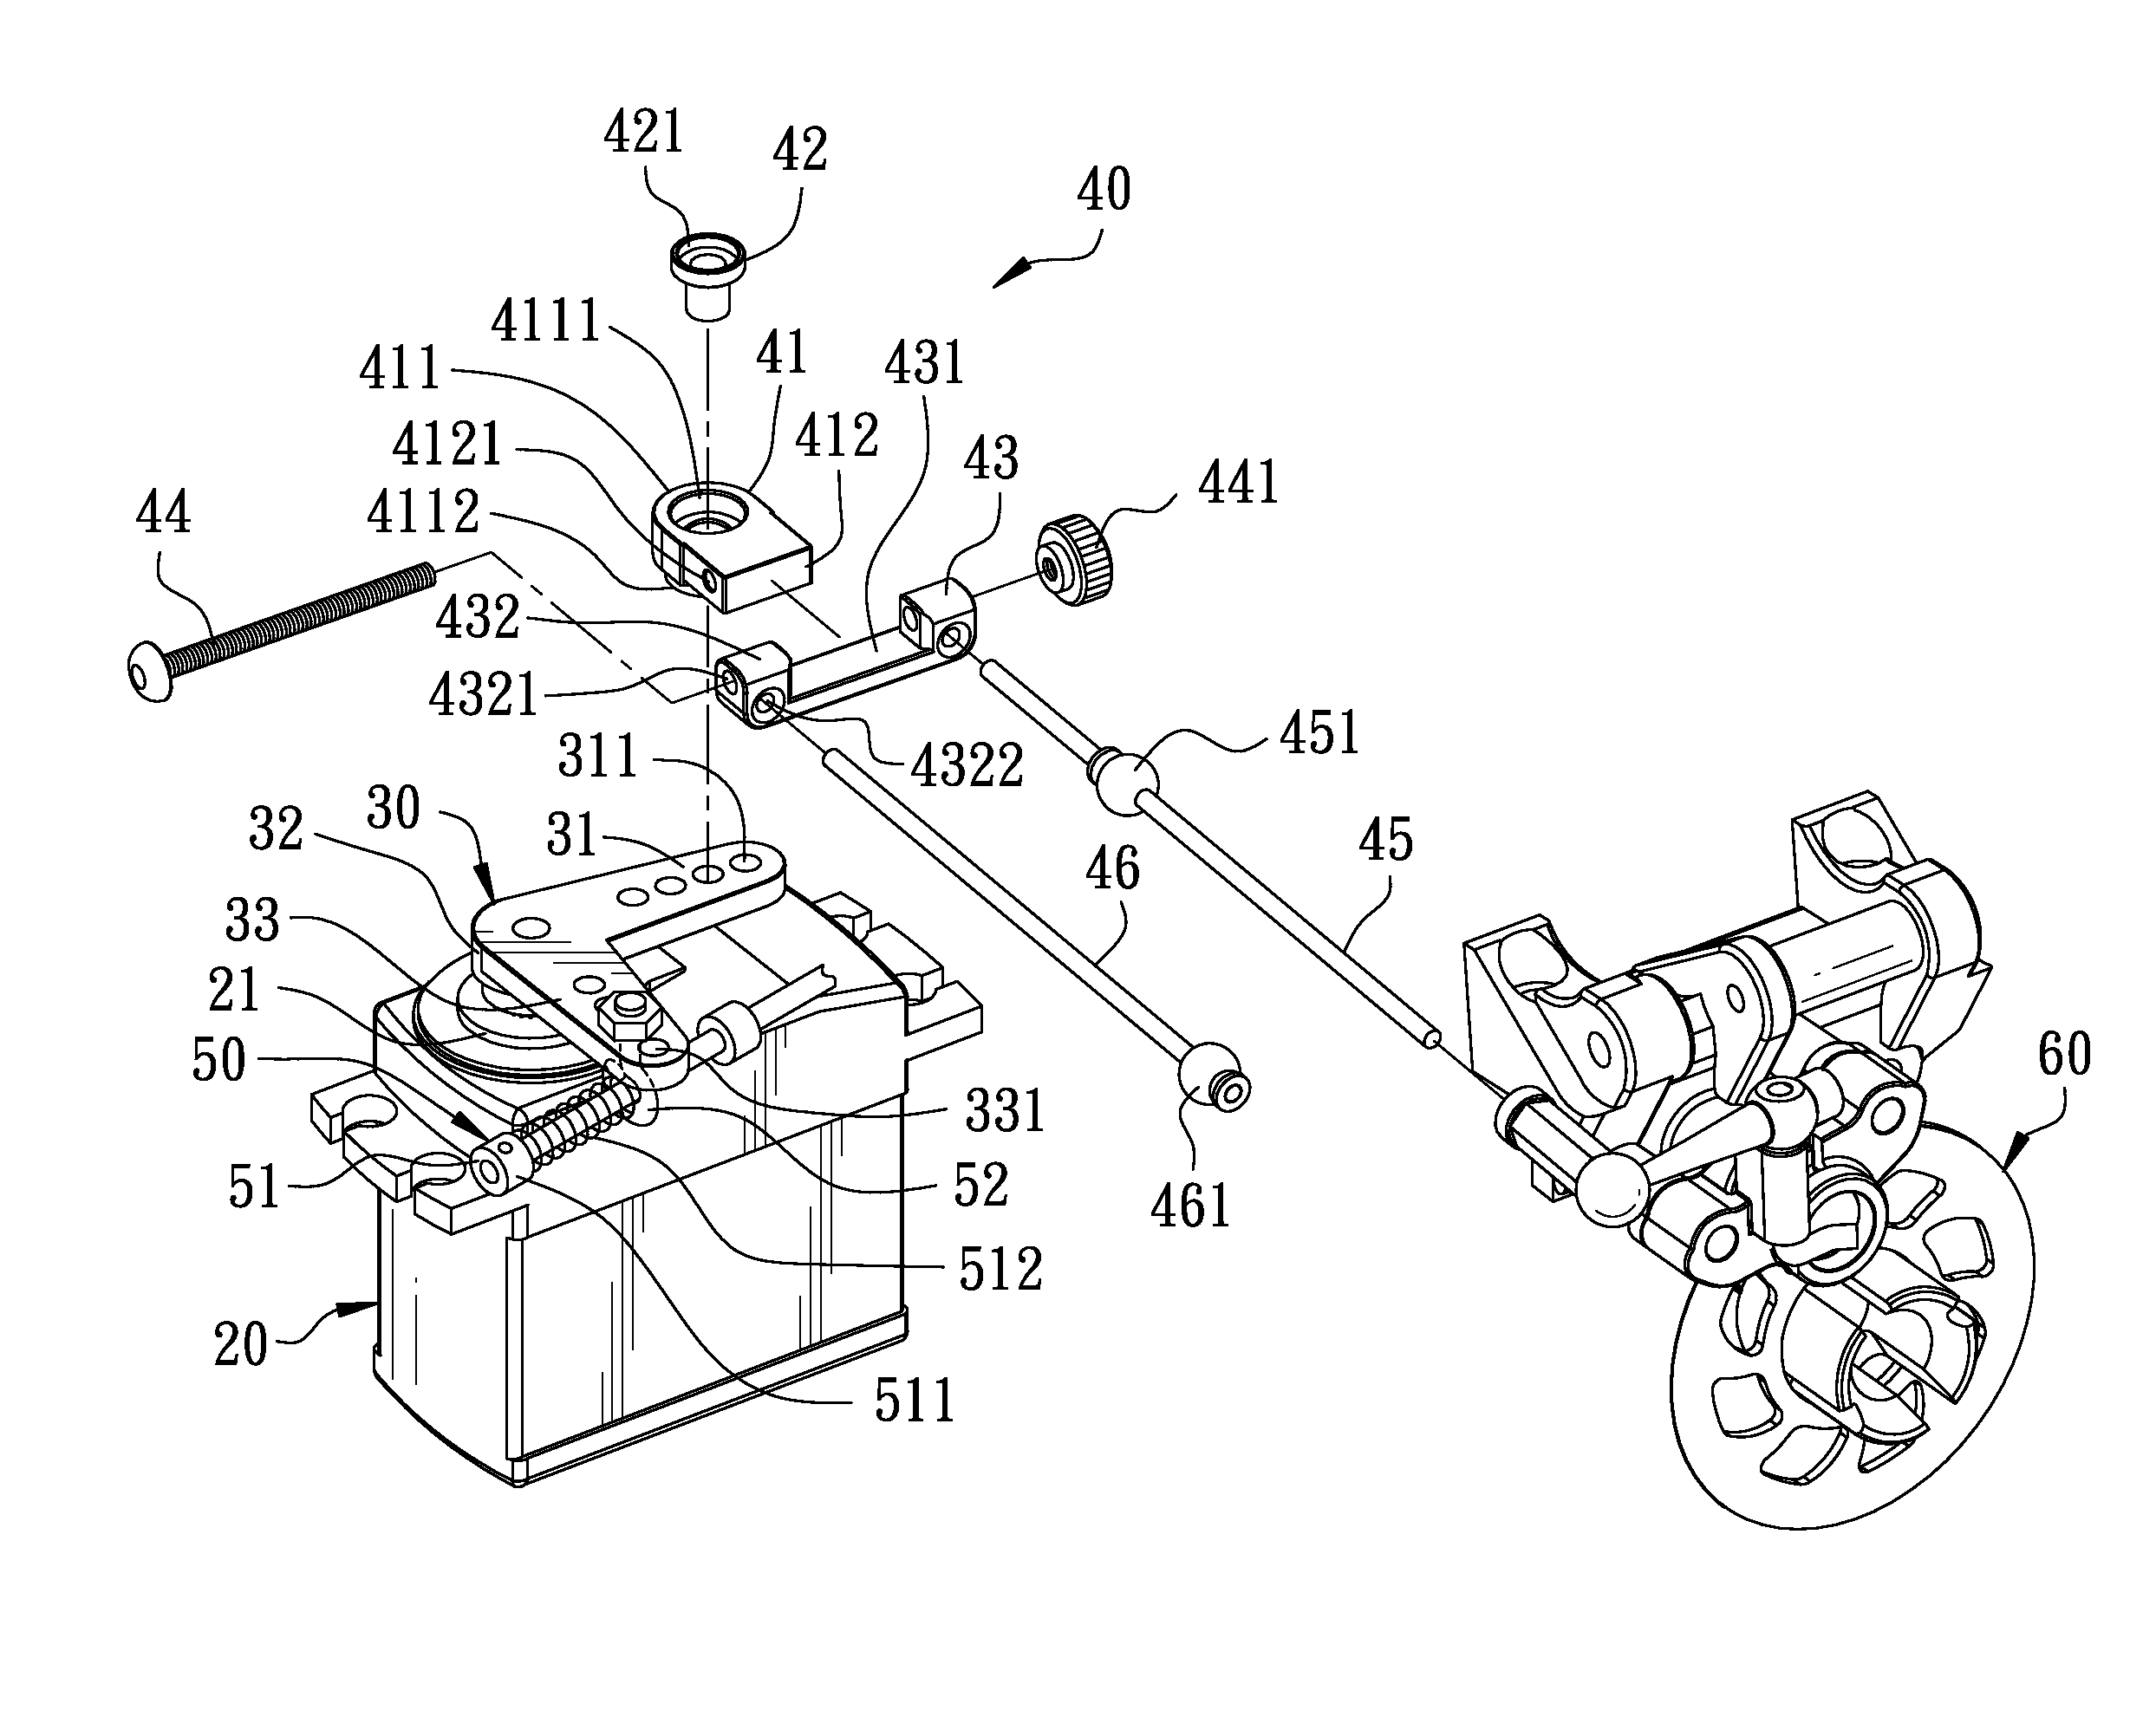 Braking ratio device for a remote control model car